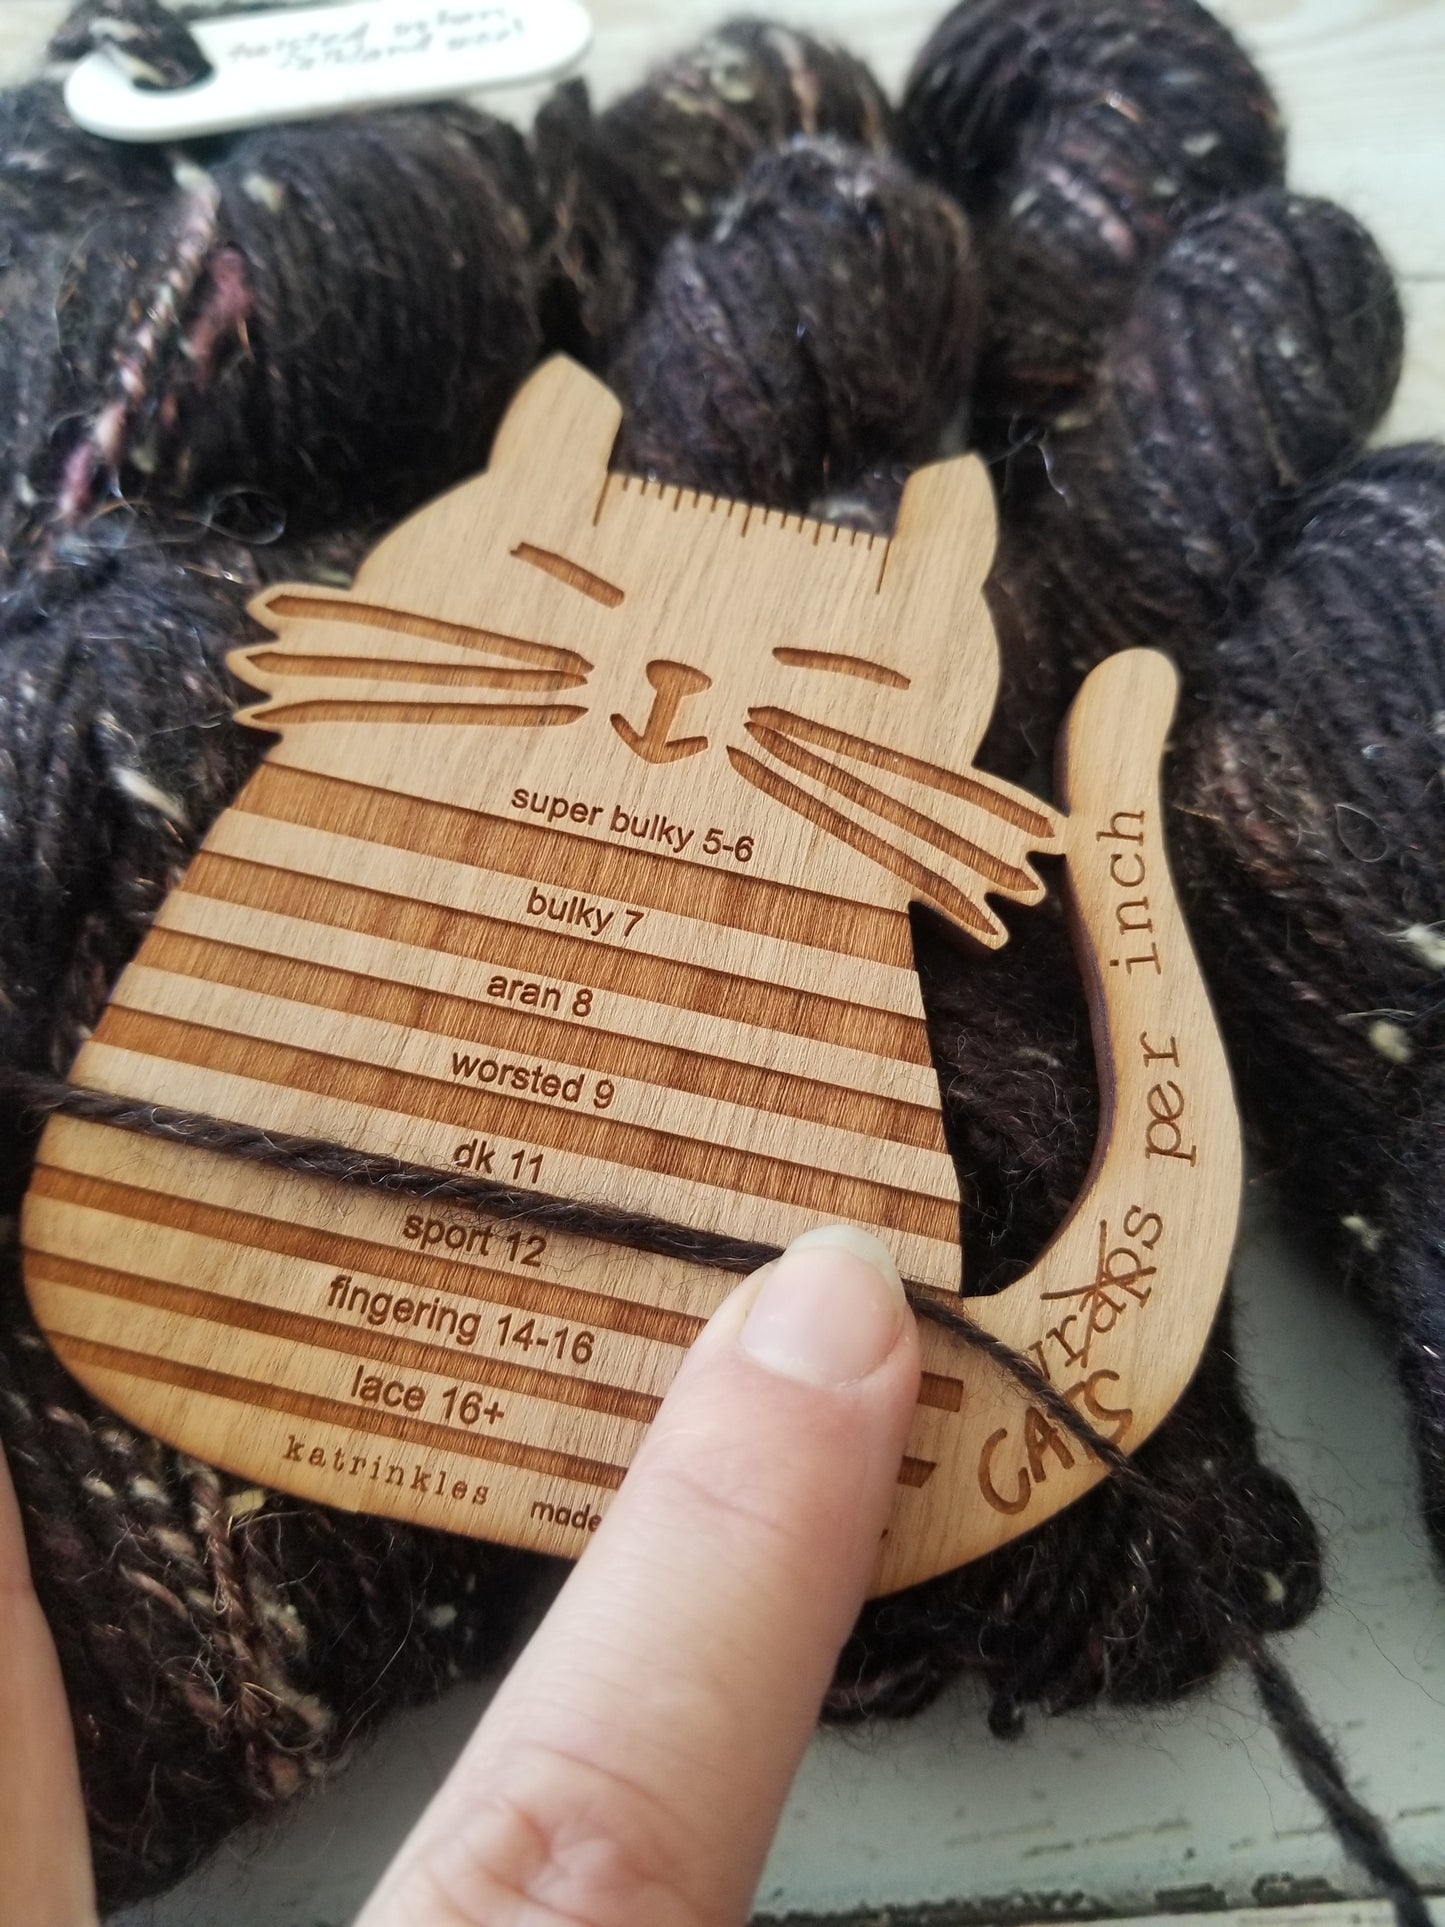 Cat-rinkles Cat Collection - "Cats Per Inch" Yarn Gauge Tool